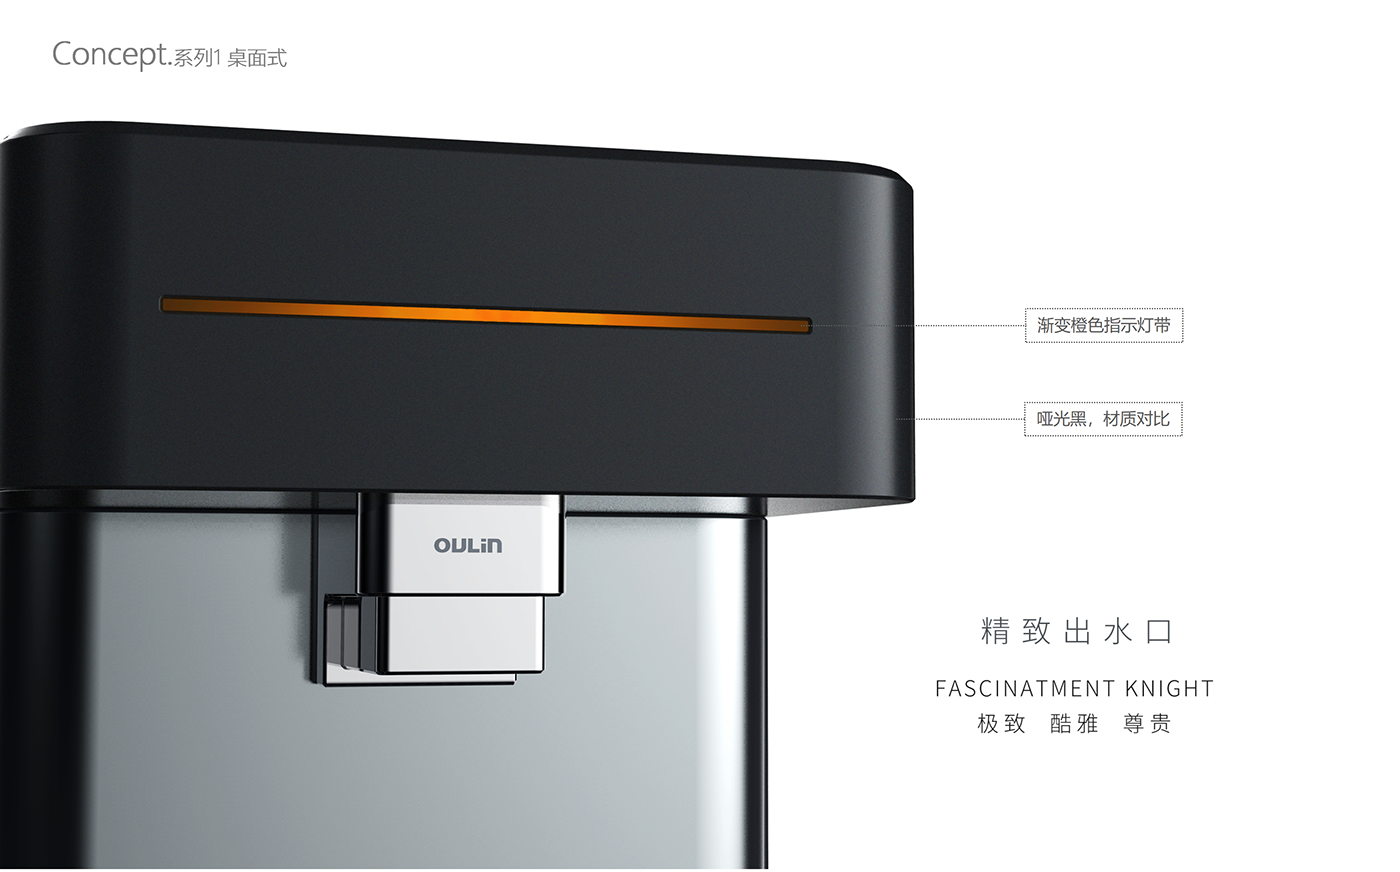 oulin water purifier product design